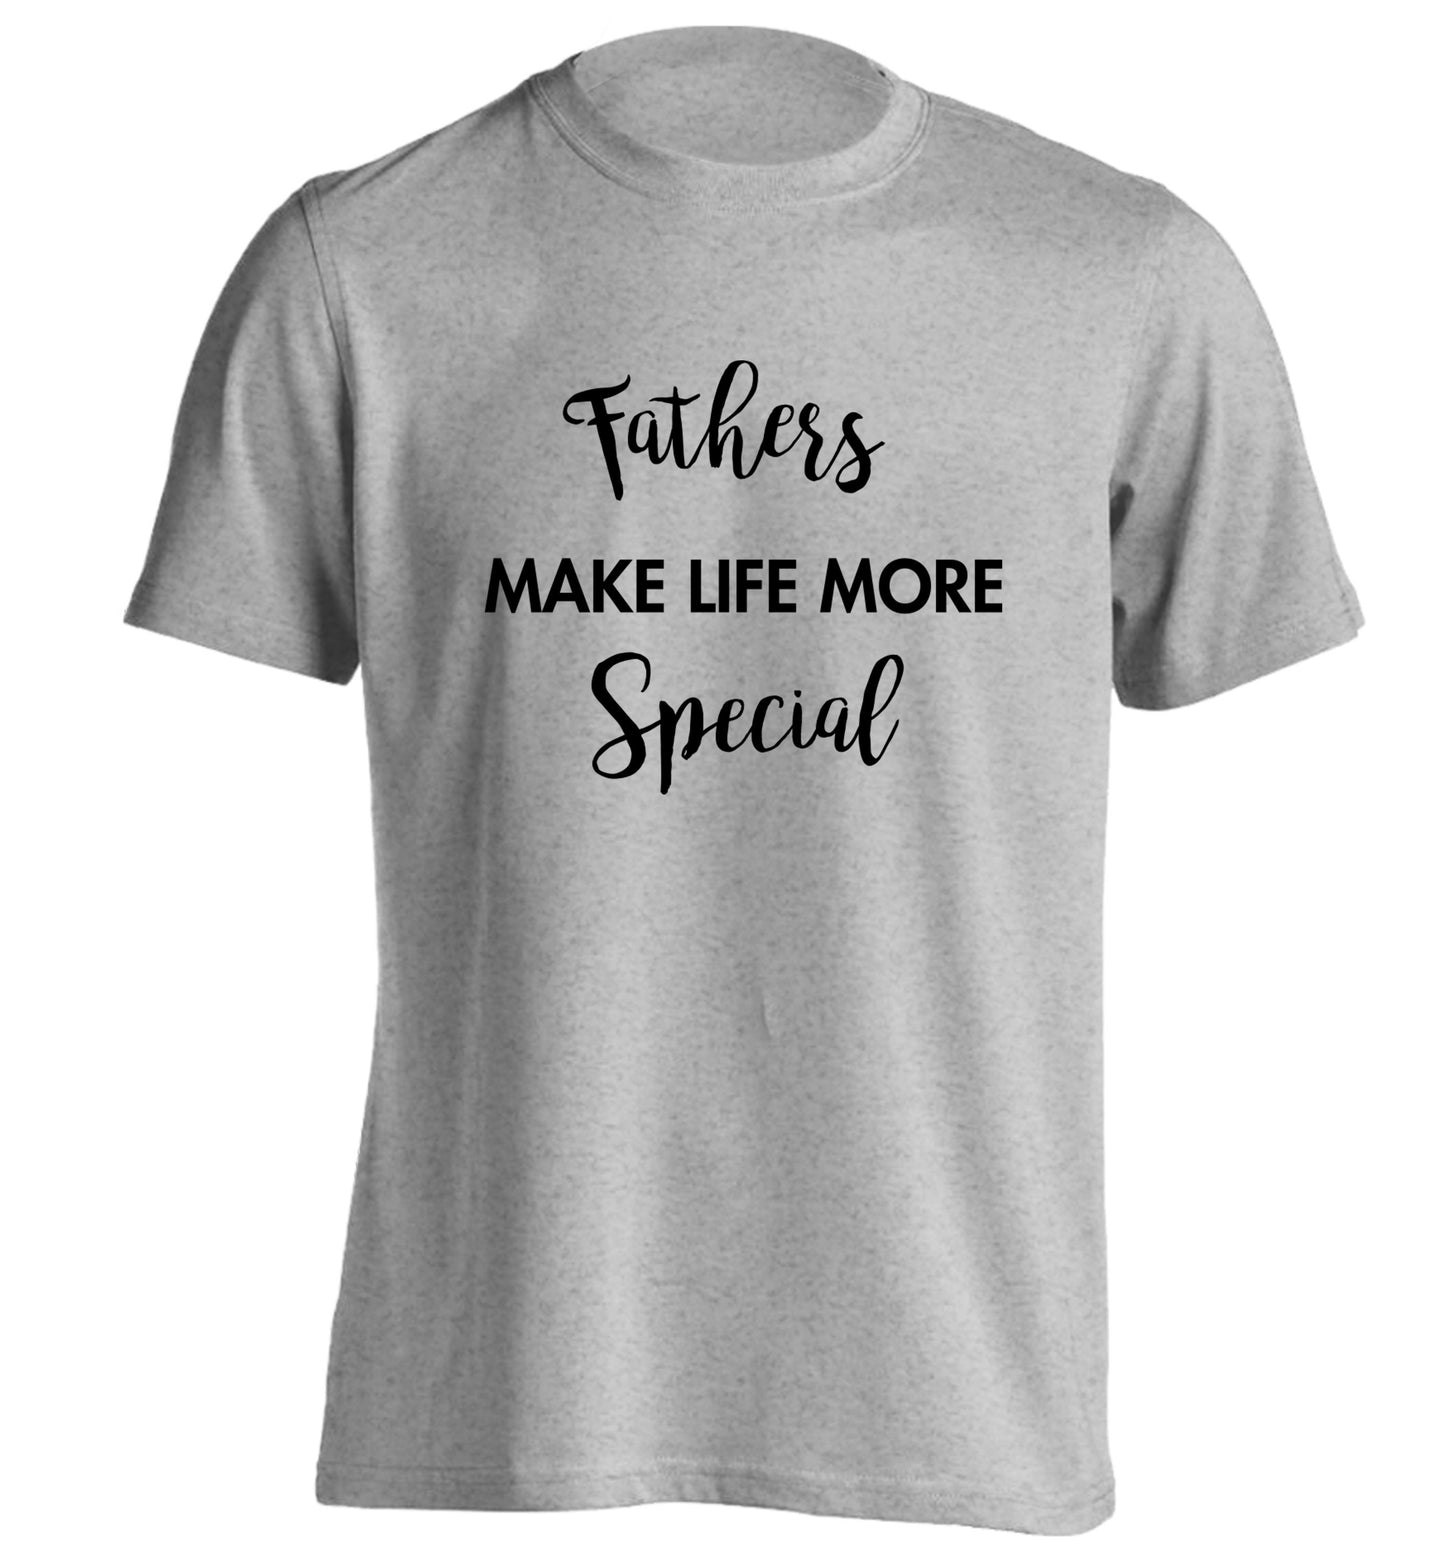 Fathers make life more special adults unisex grey Tshirt 2XL